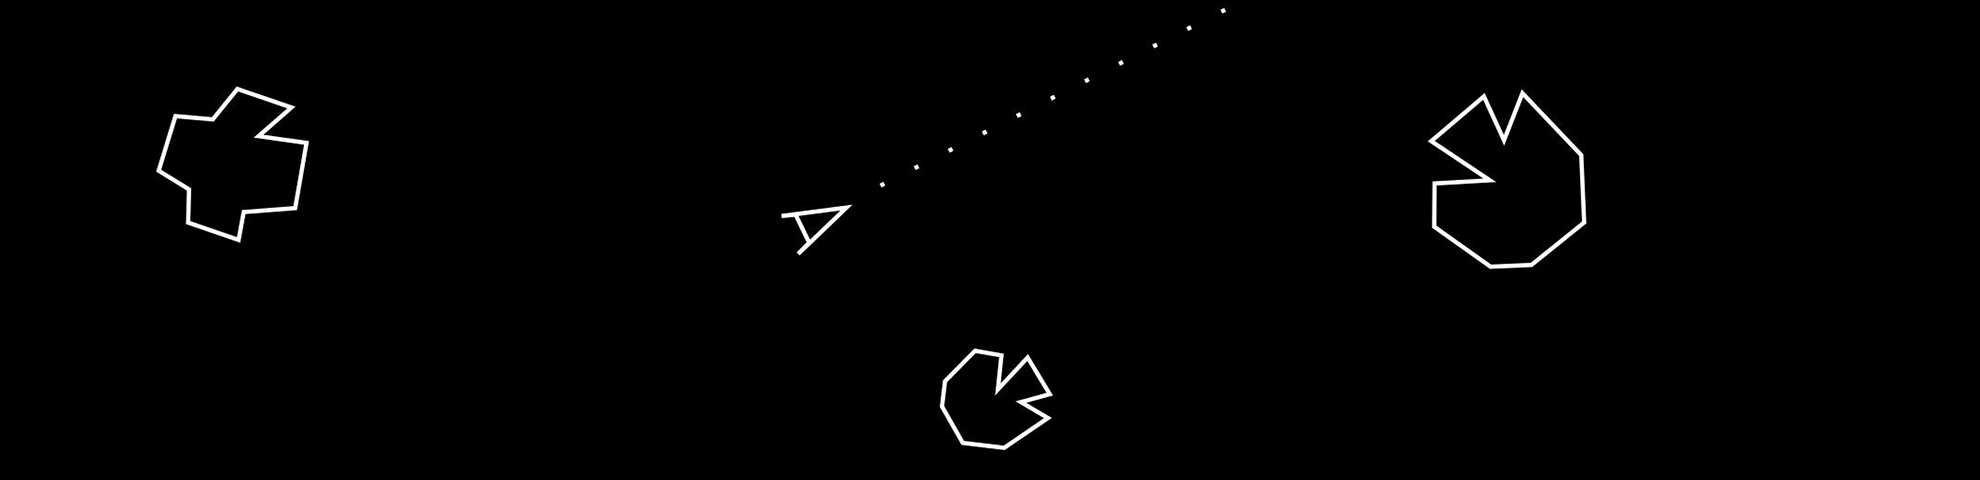 The white, dagger-like outline of a space ship floats on a black void. White outlines of asteroids drift nearby.